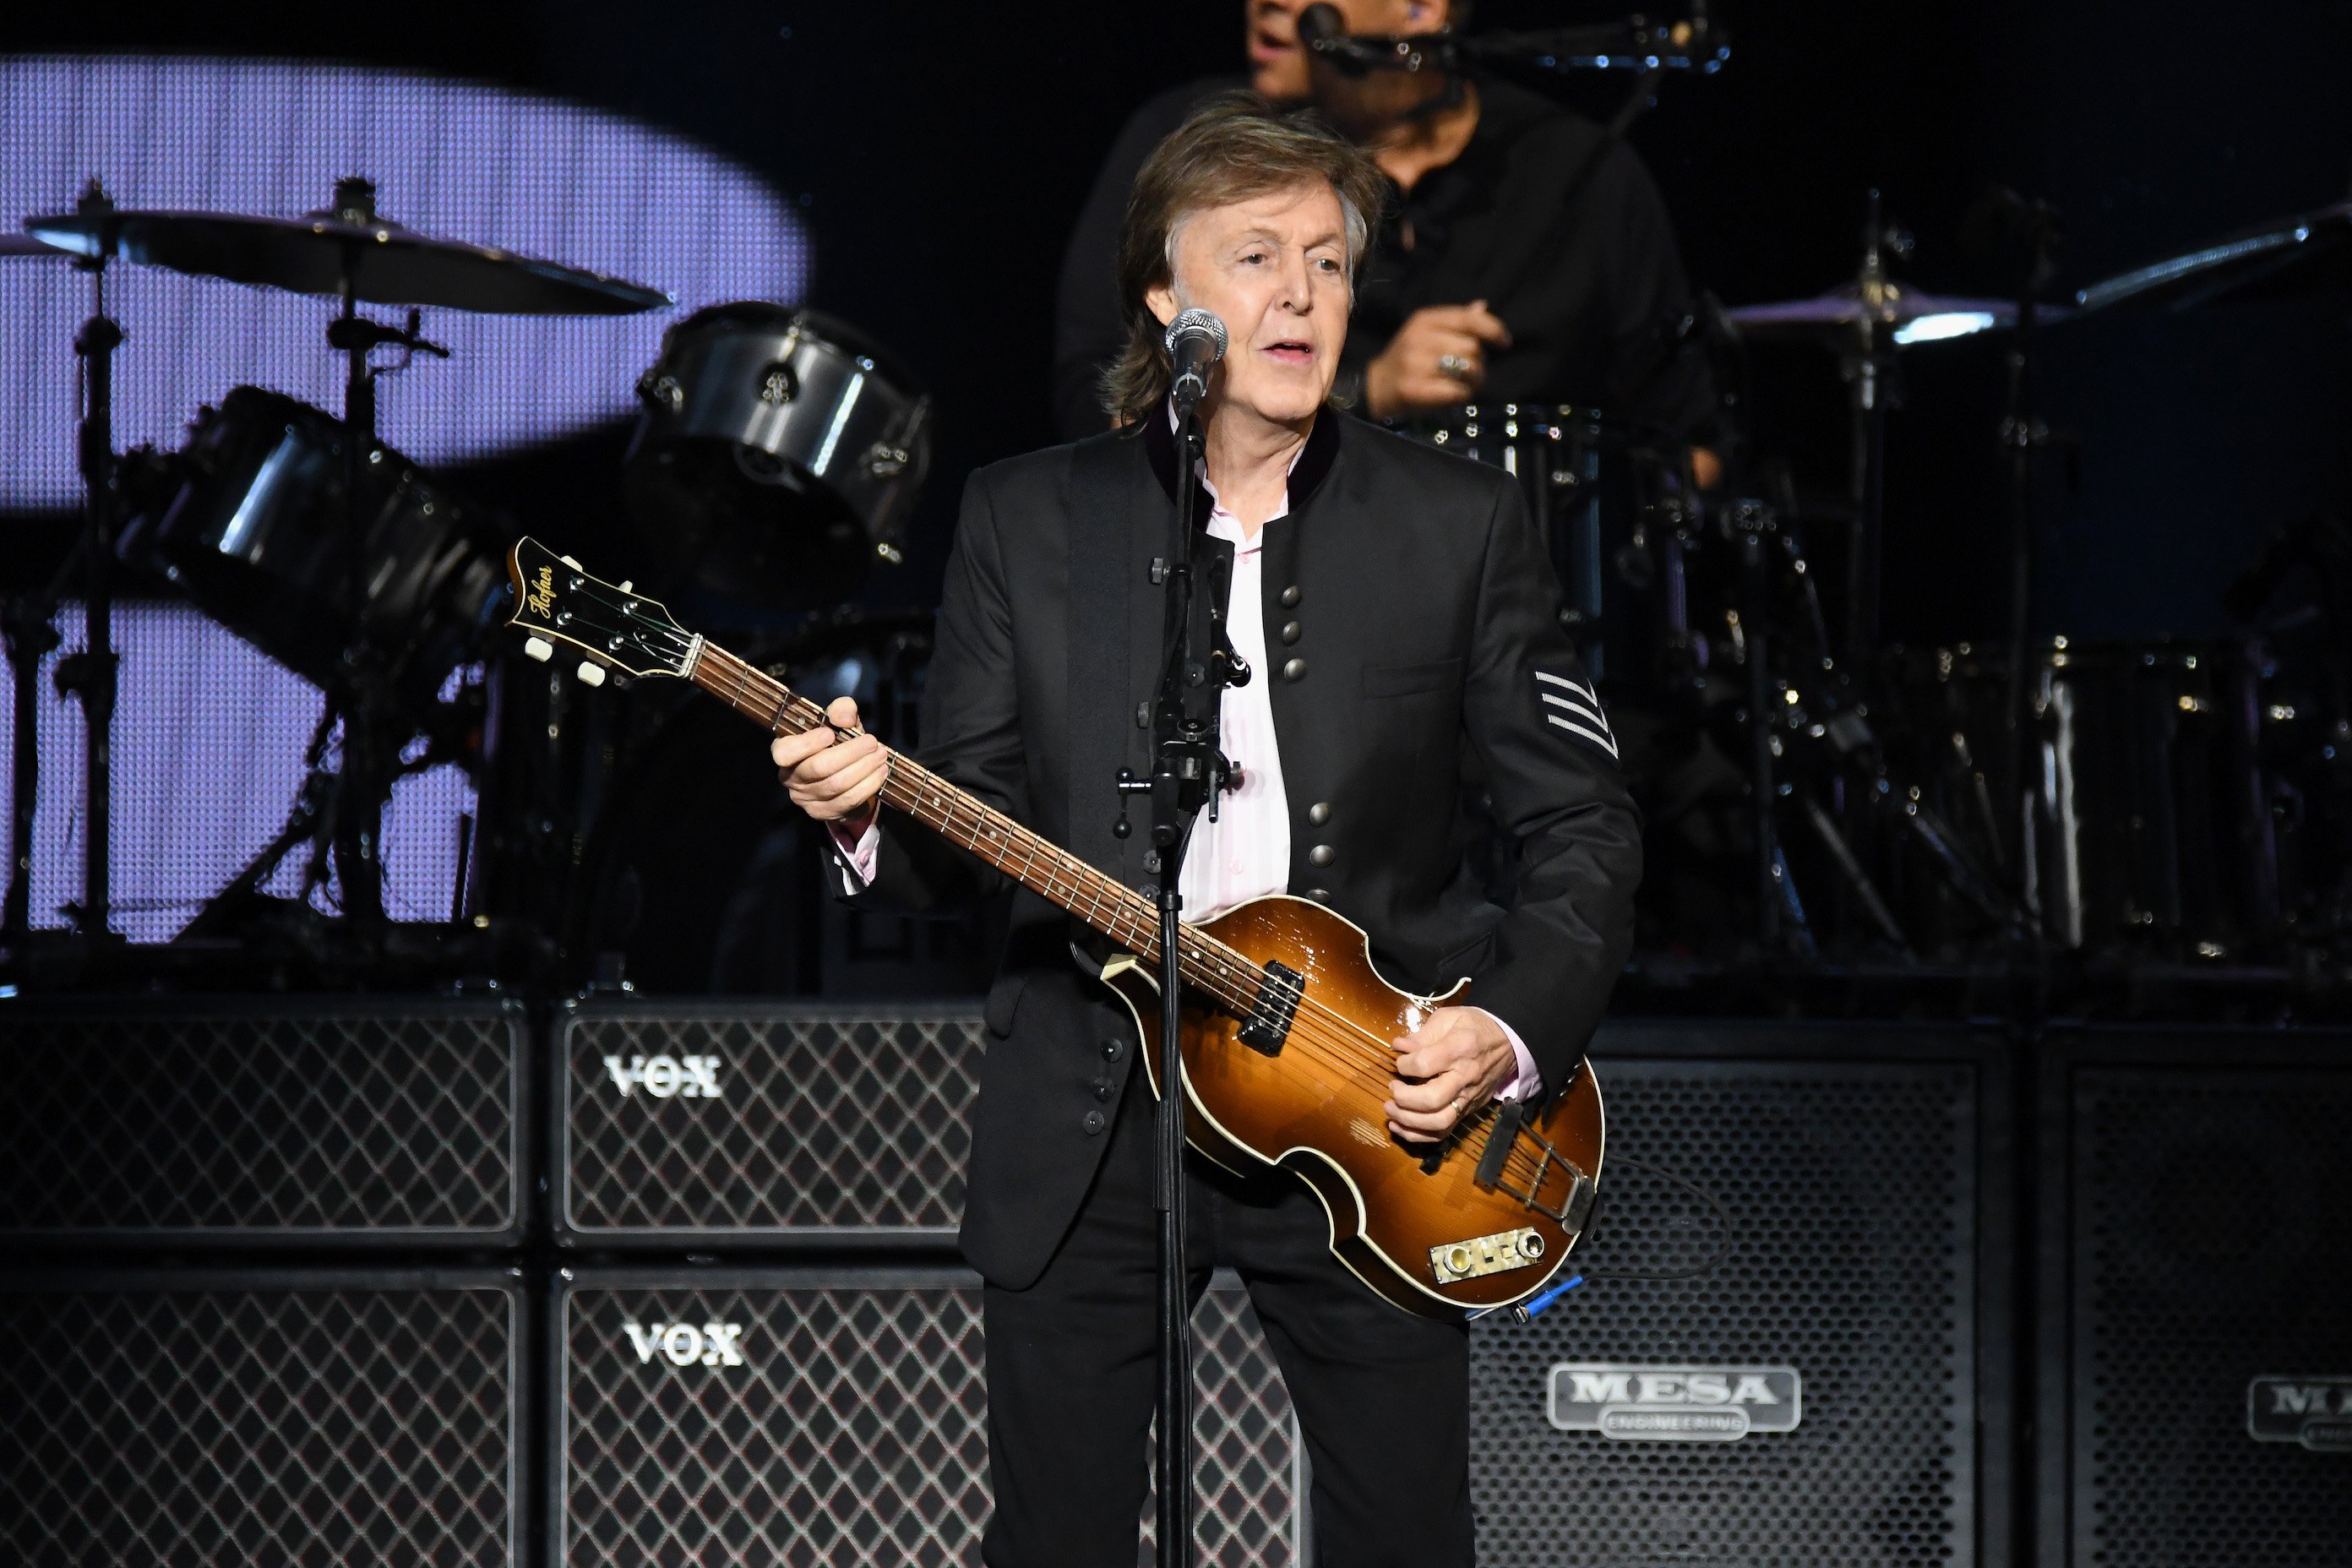 Paul McCartney performs in New York on his One On One Tour 